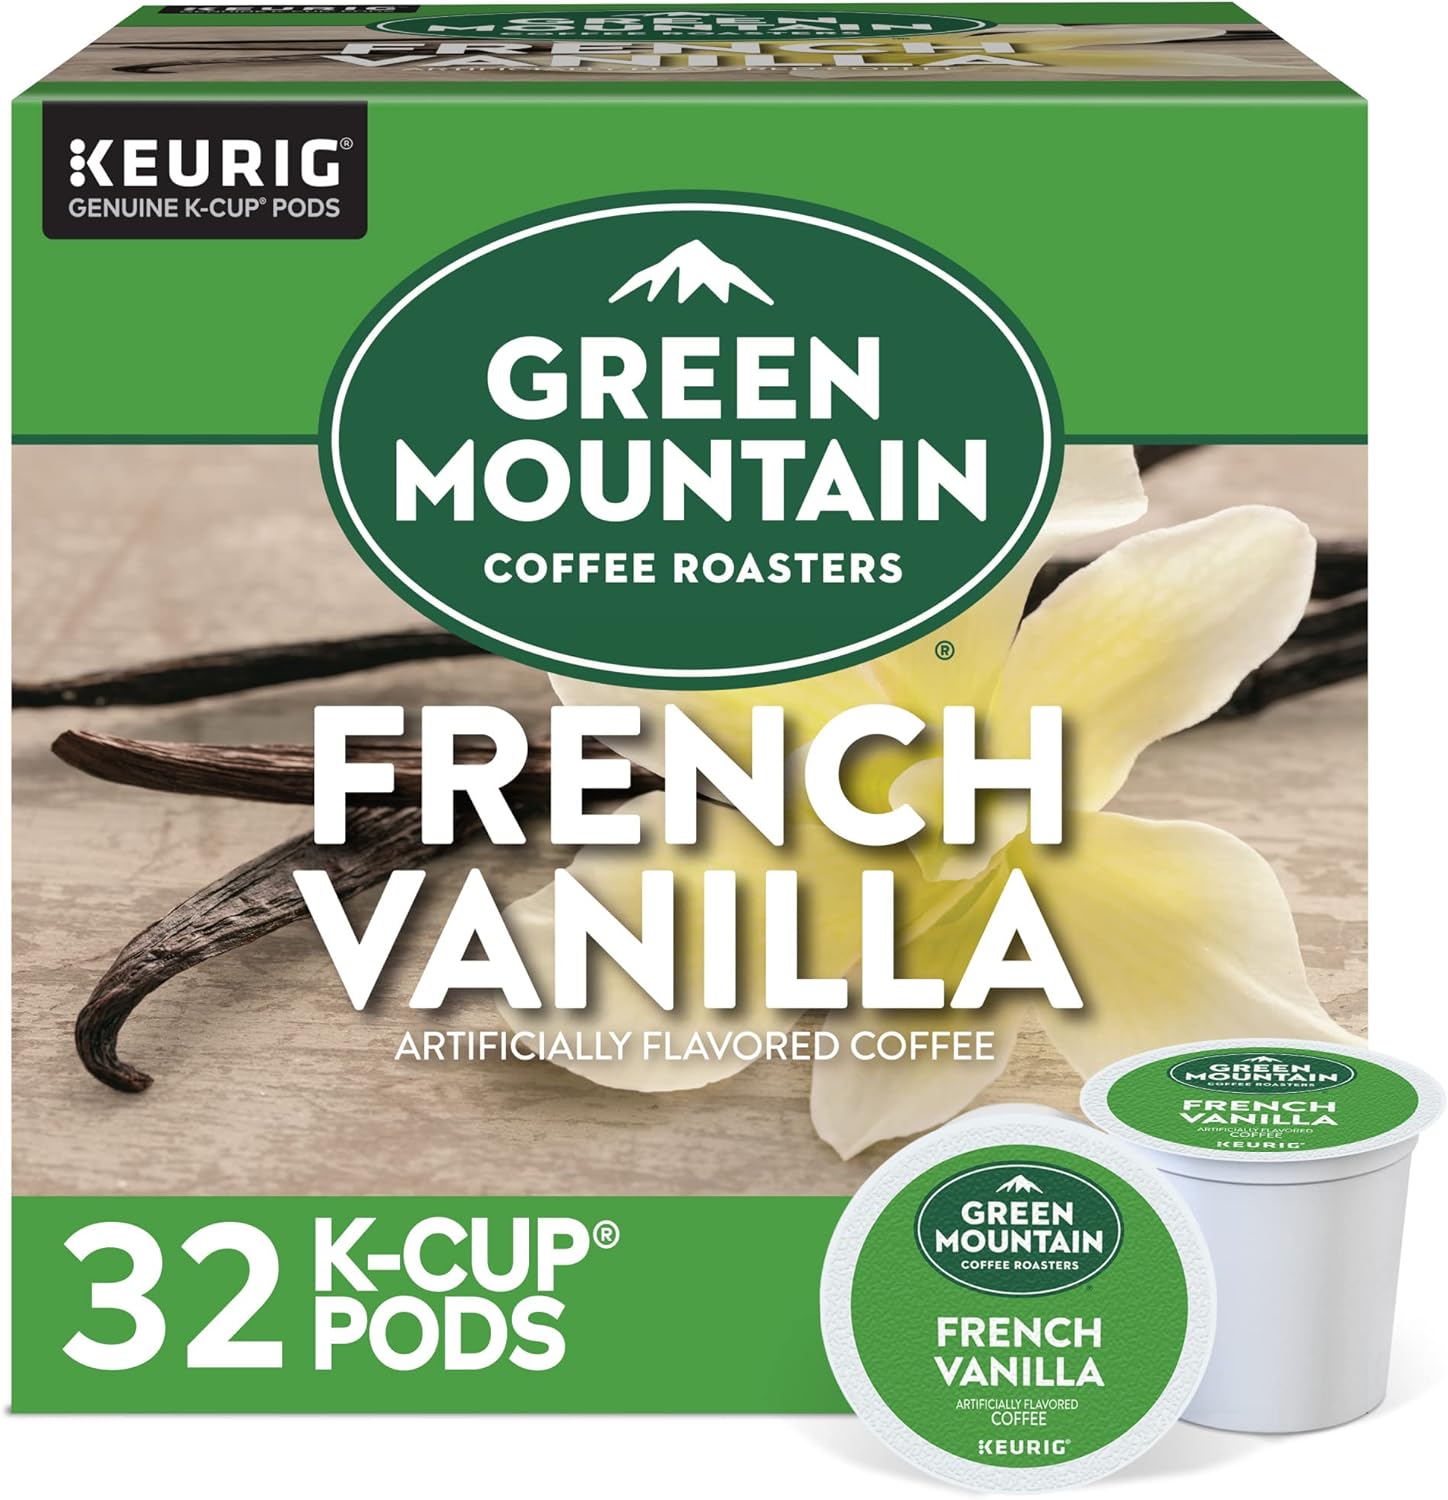 Green Mountain Coffee Roasters French Vanilla Coffee, Keurig Single-Serve K-Cup pods, Light Roast, 32 Count